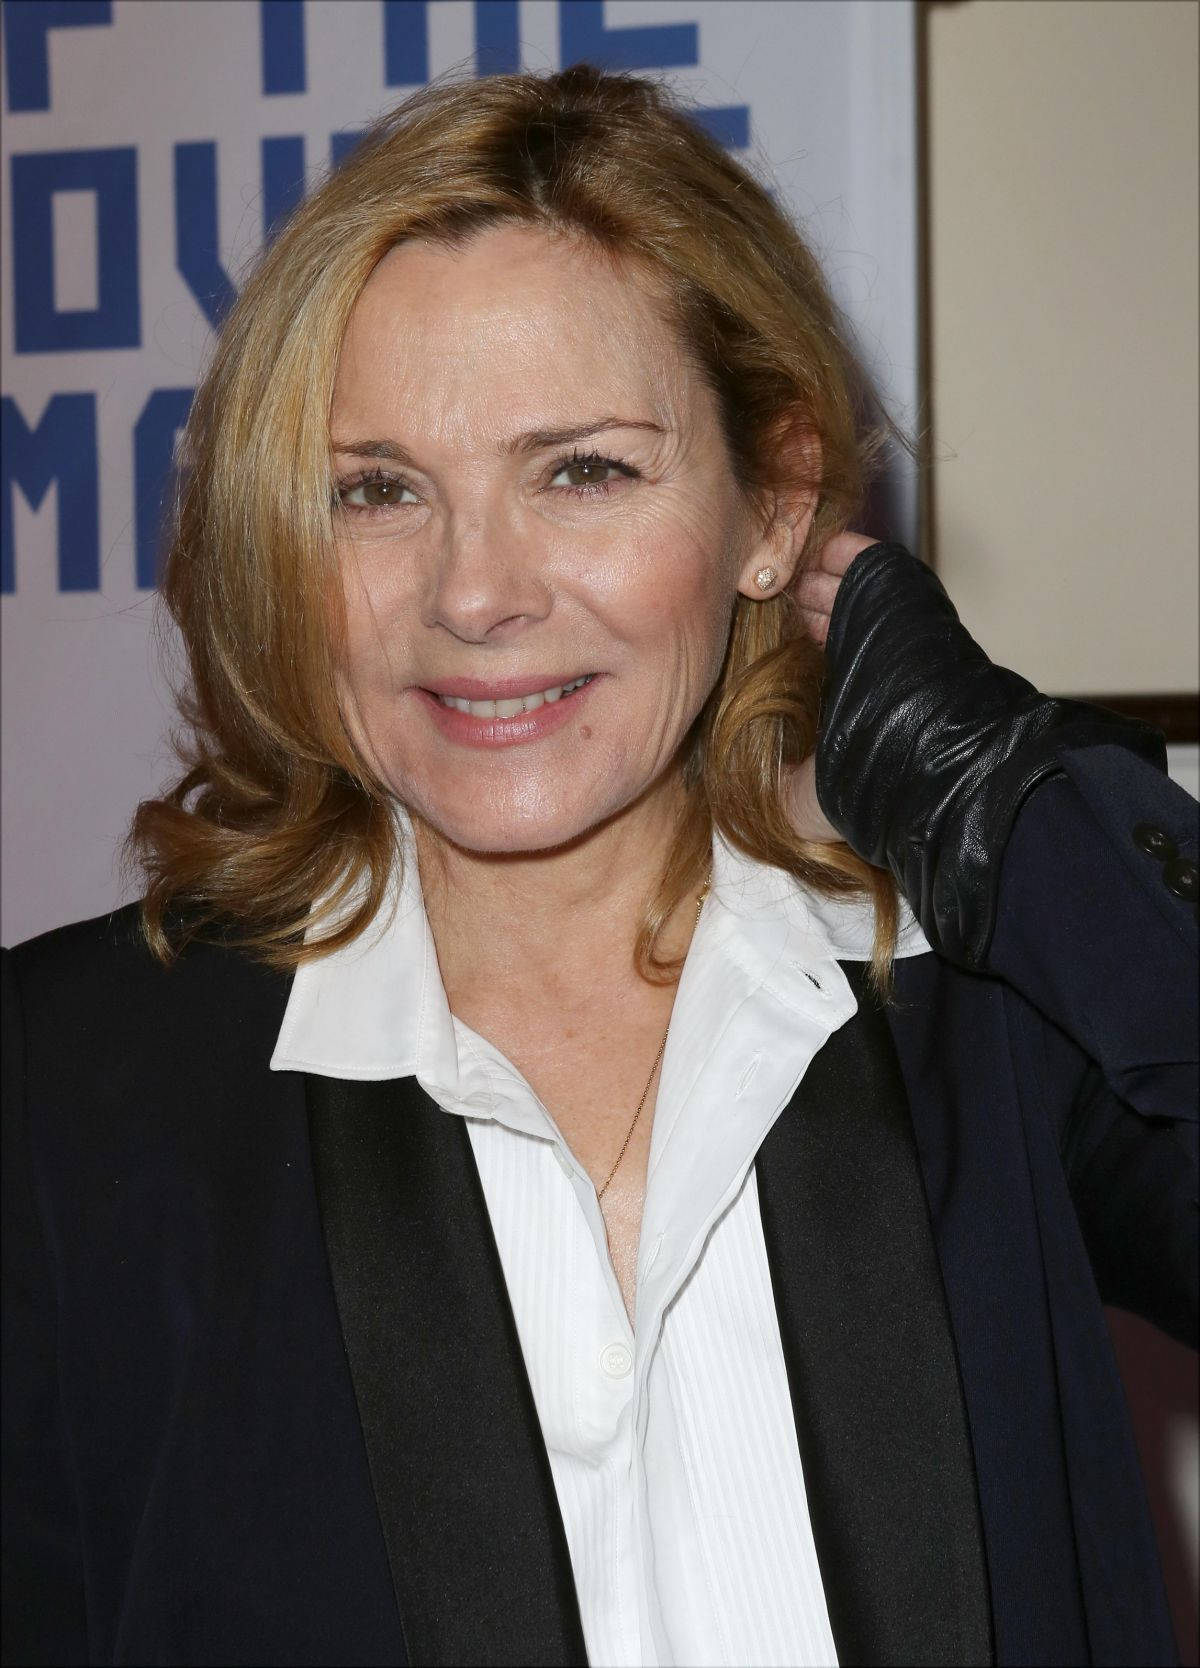 Actress Cattrall In Black And White Suit Wallpaper